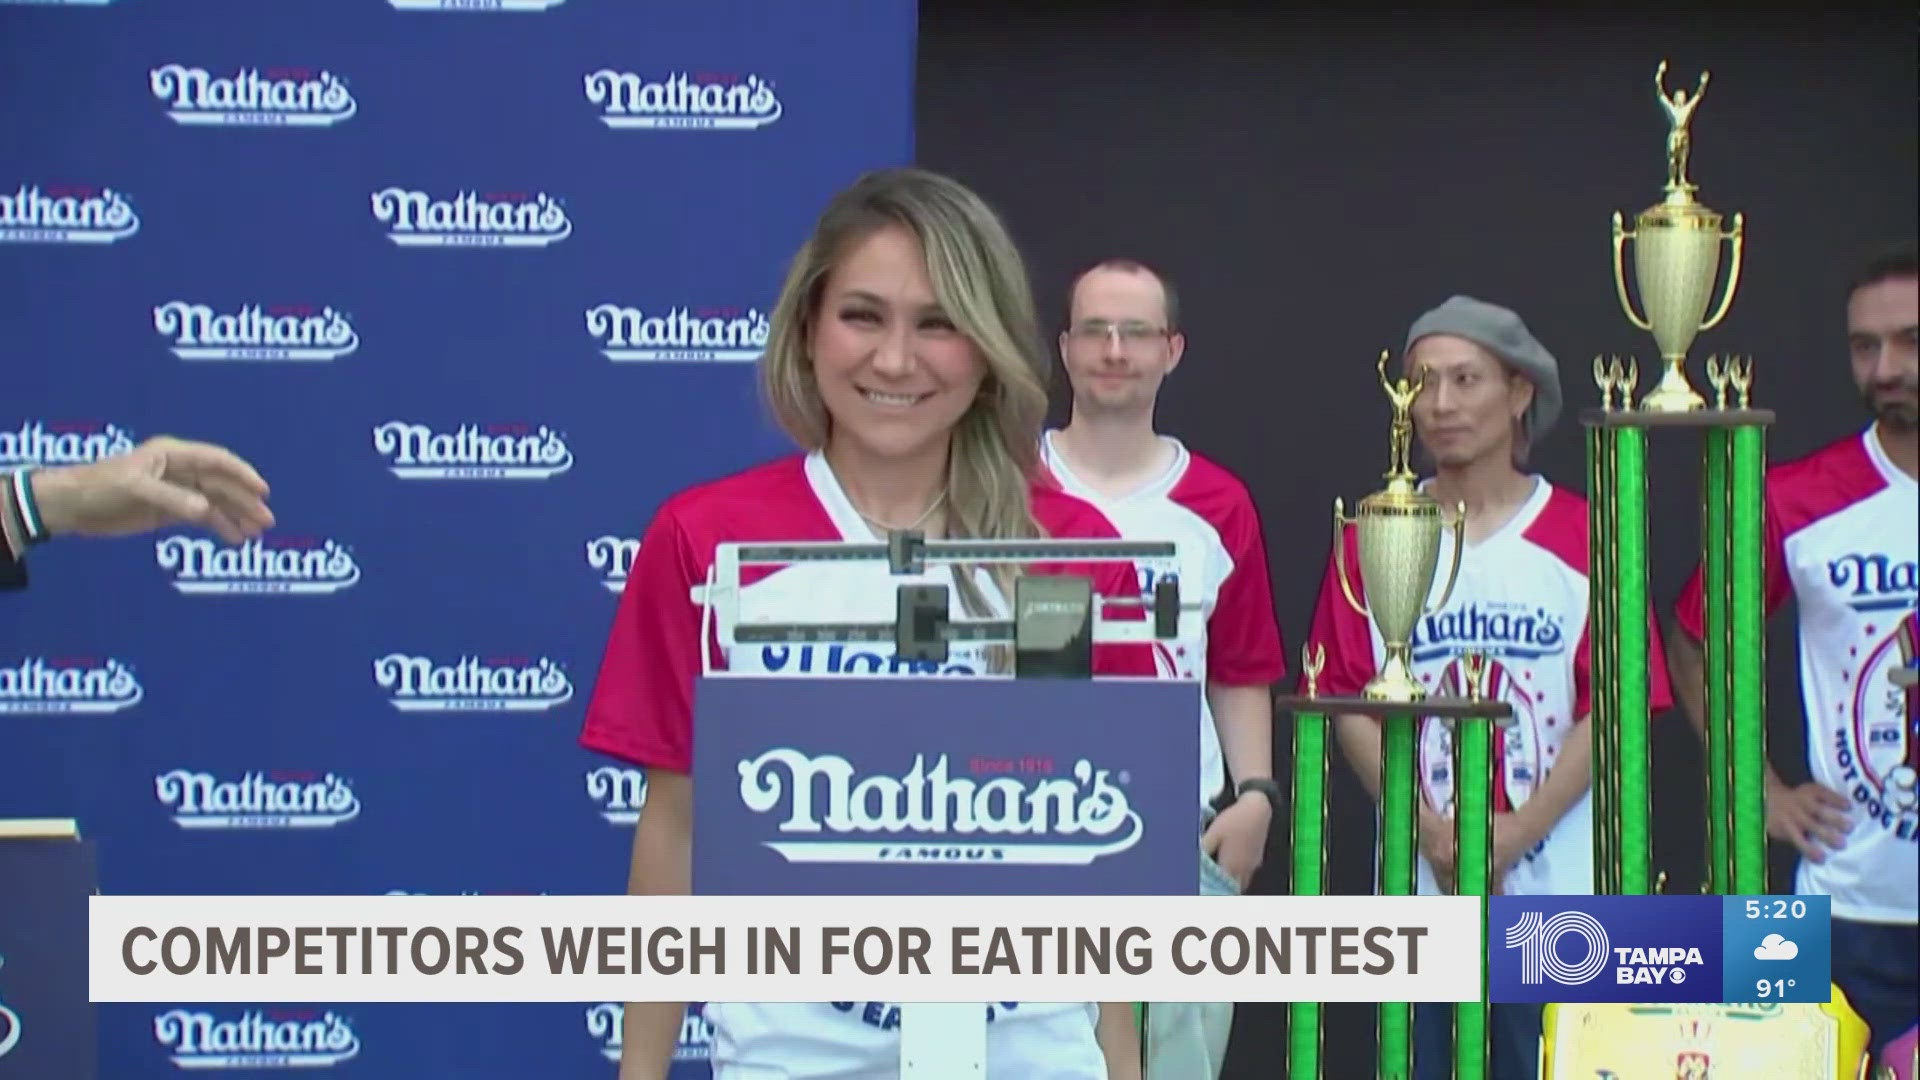 Mimi Sudo holds the women's world record of 48.5 hot dogs and buns eaten in 10 minutes. She's set to defend her title on Independence Day.